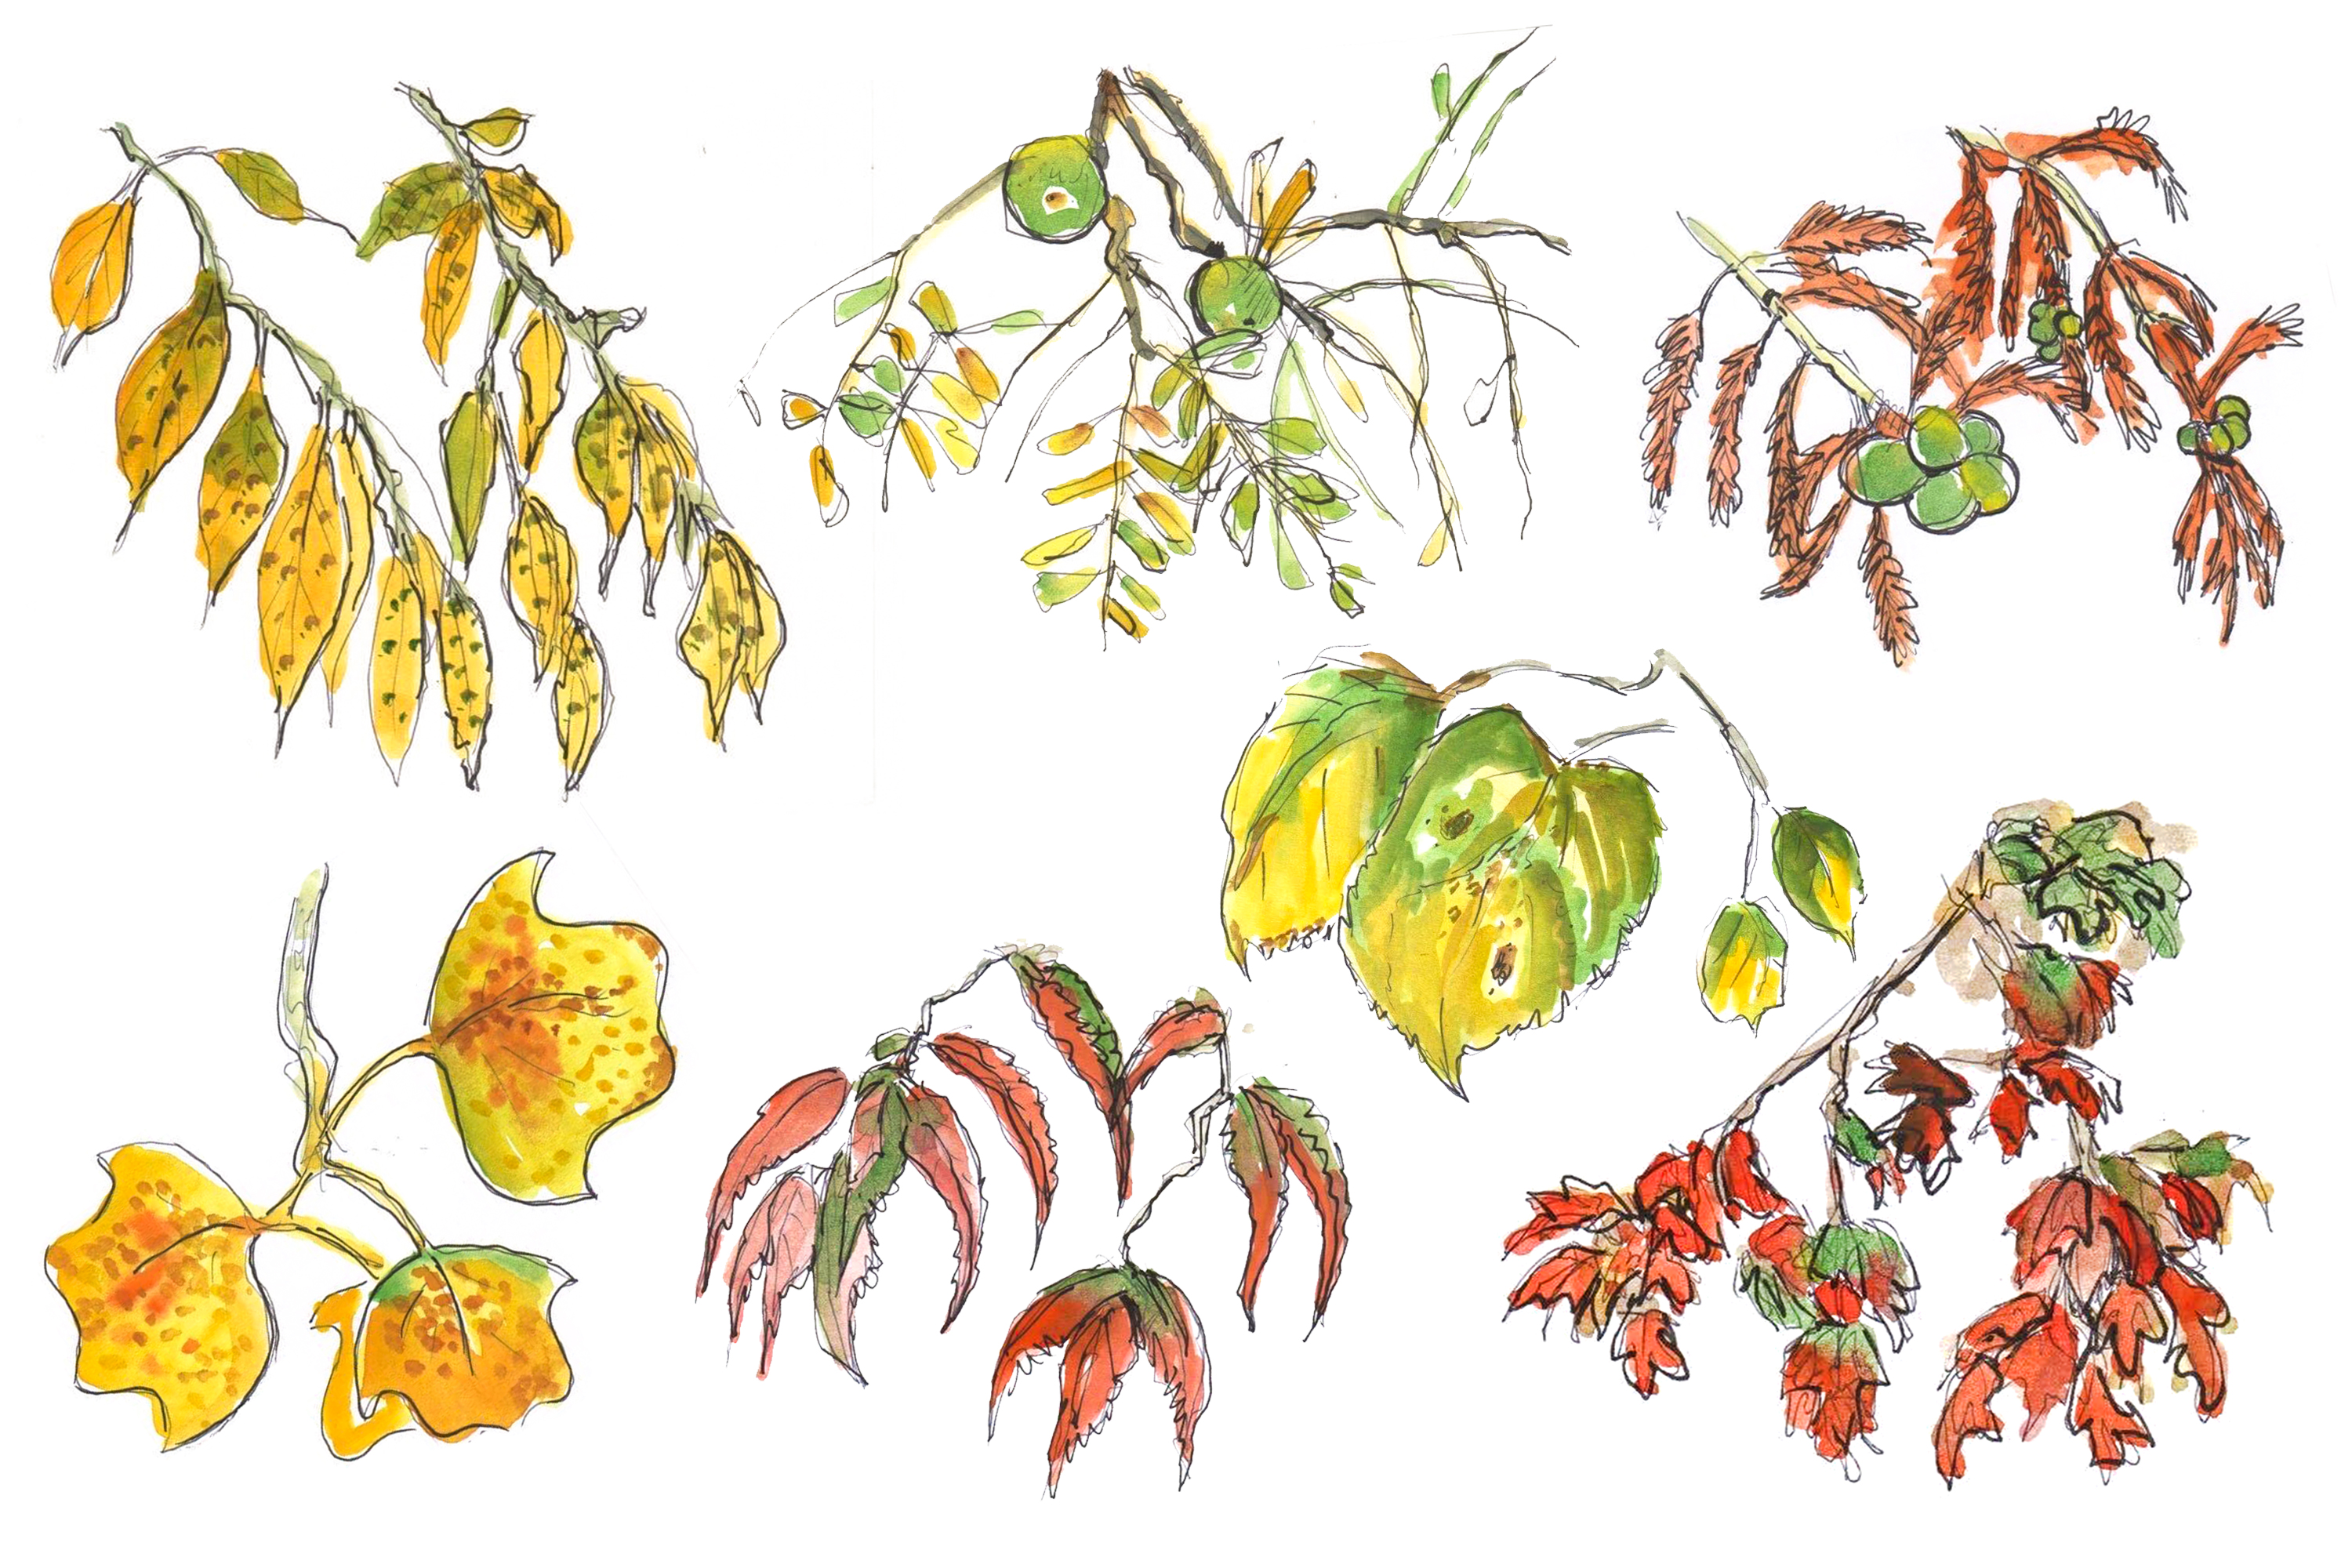 Ink and watercolor sketch of basswood, walnut, red cypress, tulip poplar, sourwood, basswood, and sugar maple leaves